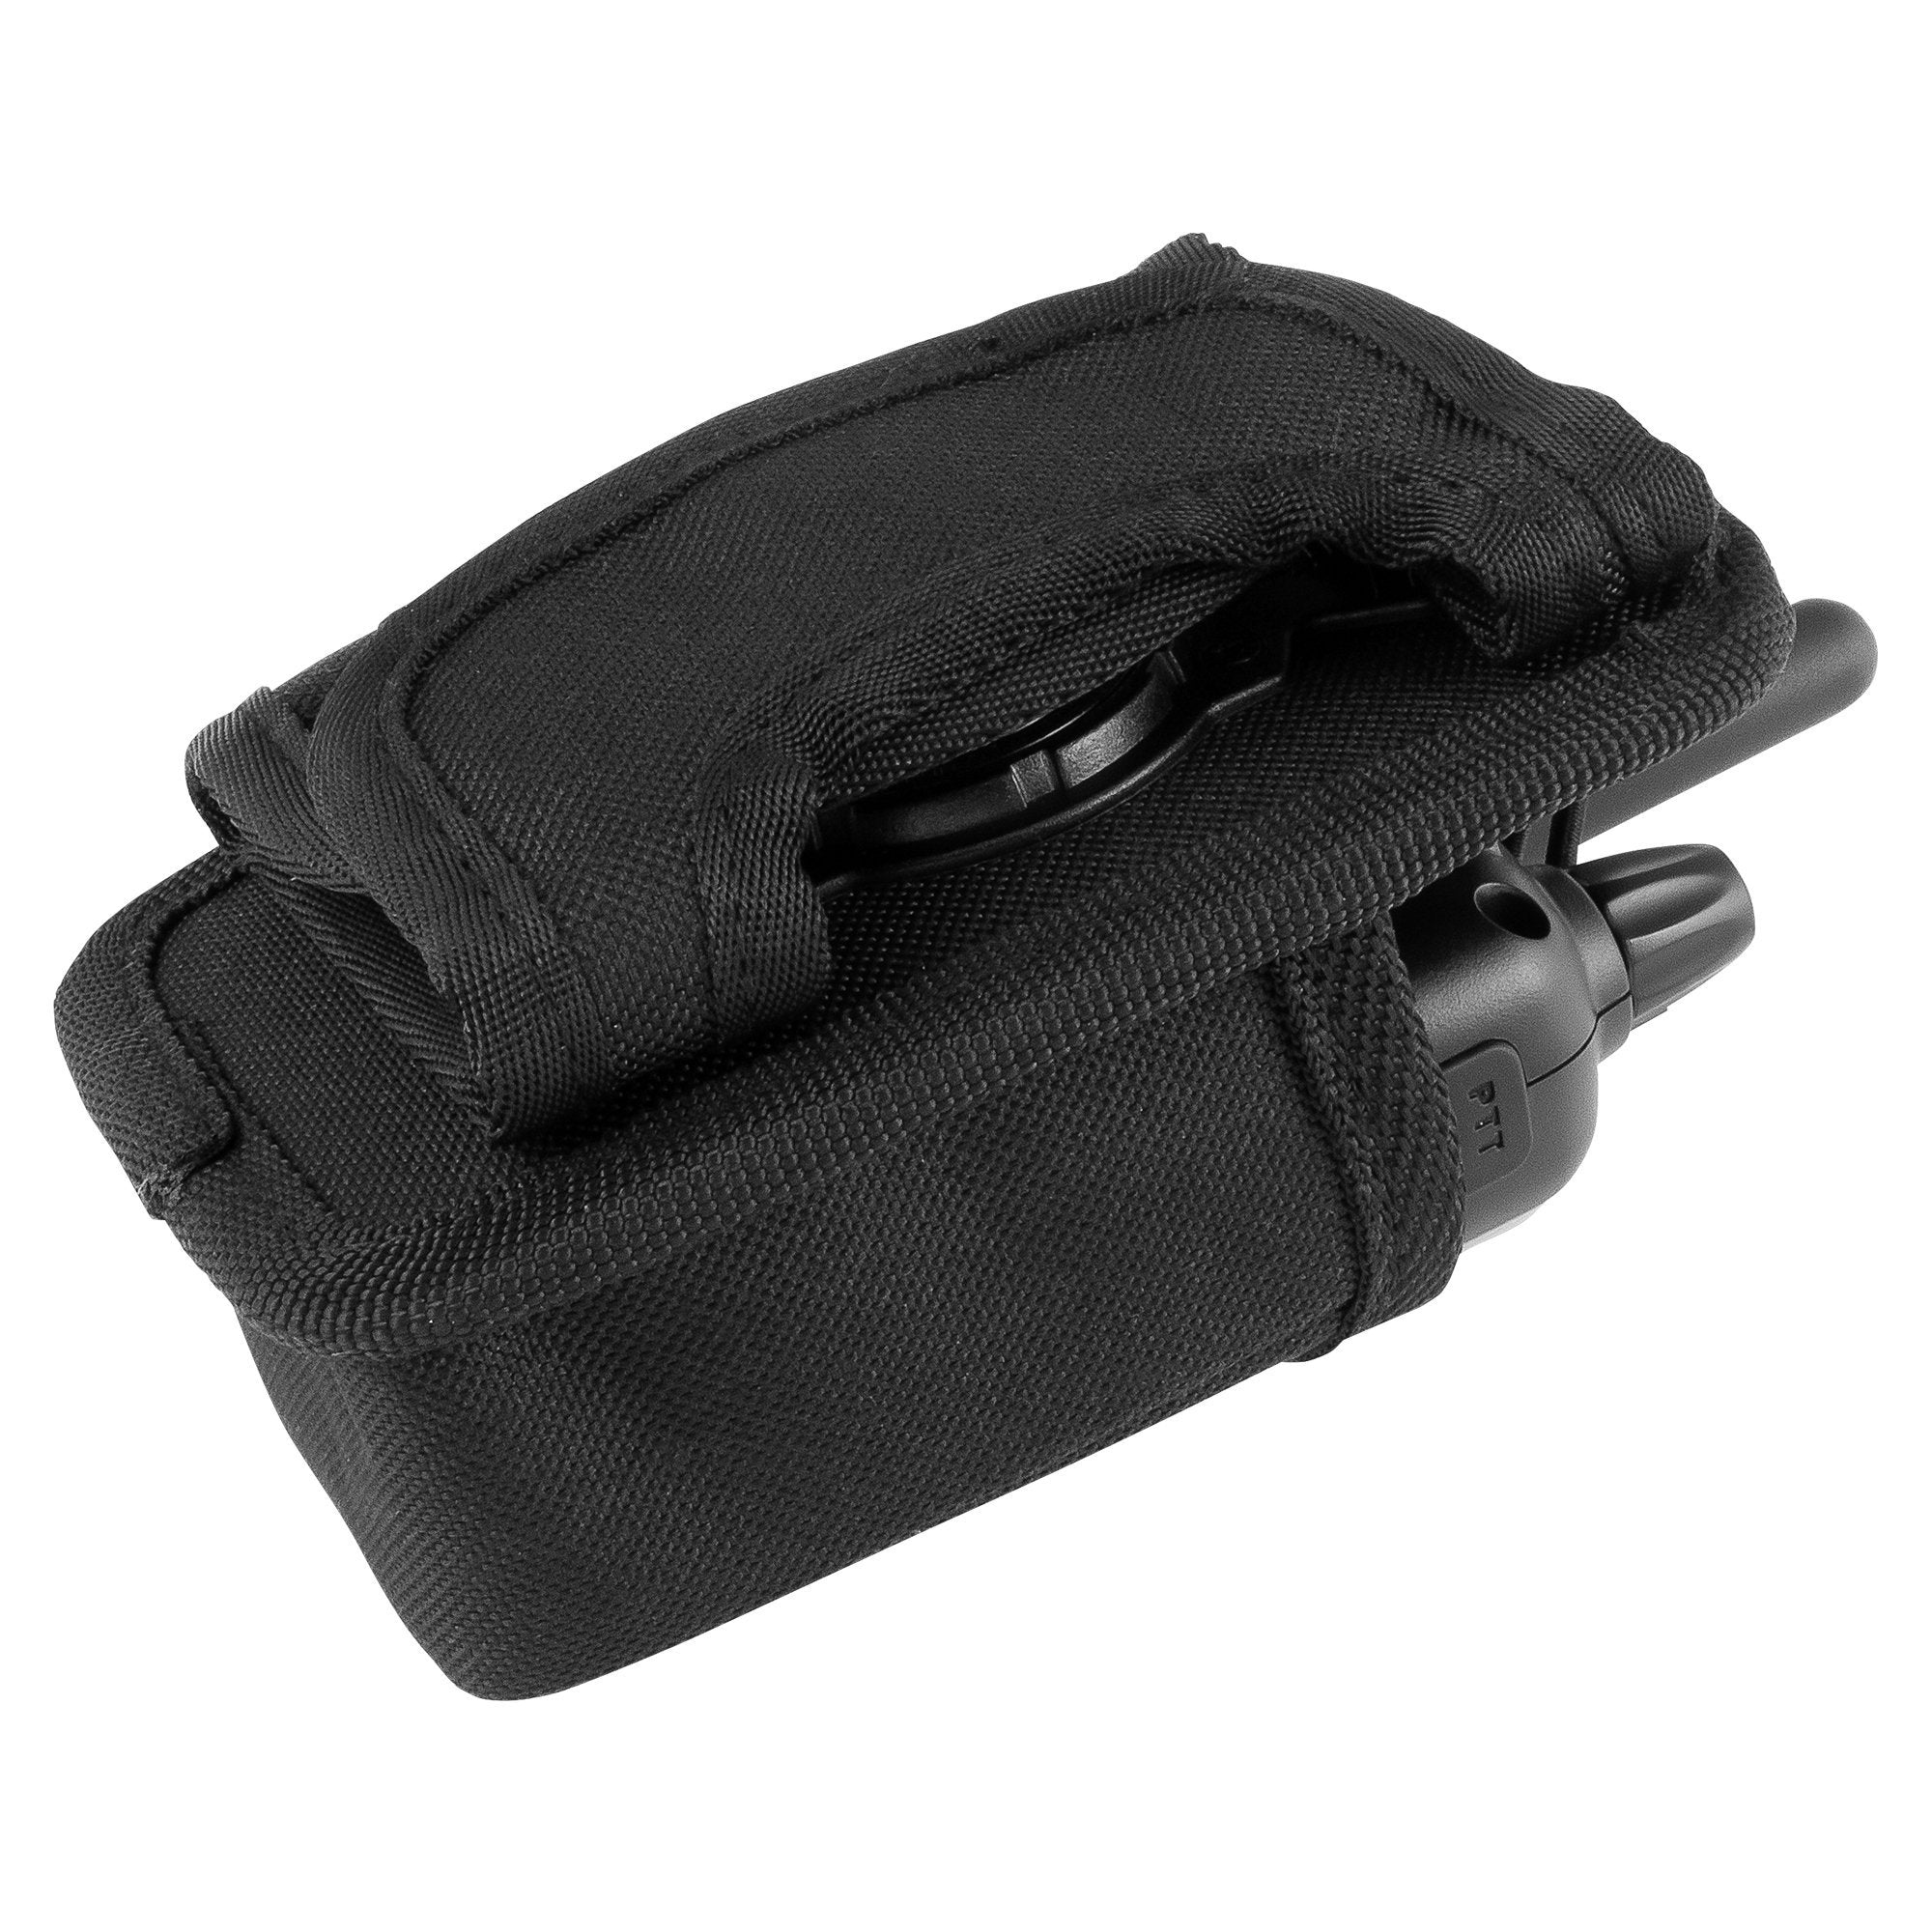 Tactical Universal Radio Holster / Radio Pouch Holder Case Bag Military  Molle Radio Case for Pofung Motorola Midland CB Walkie Talkies Compatible  with